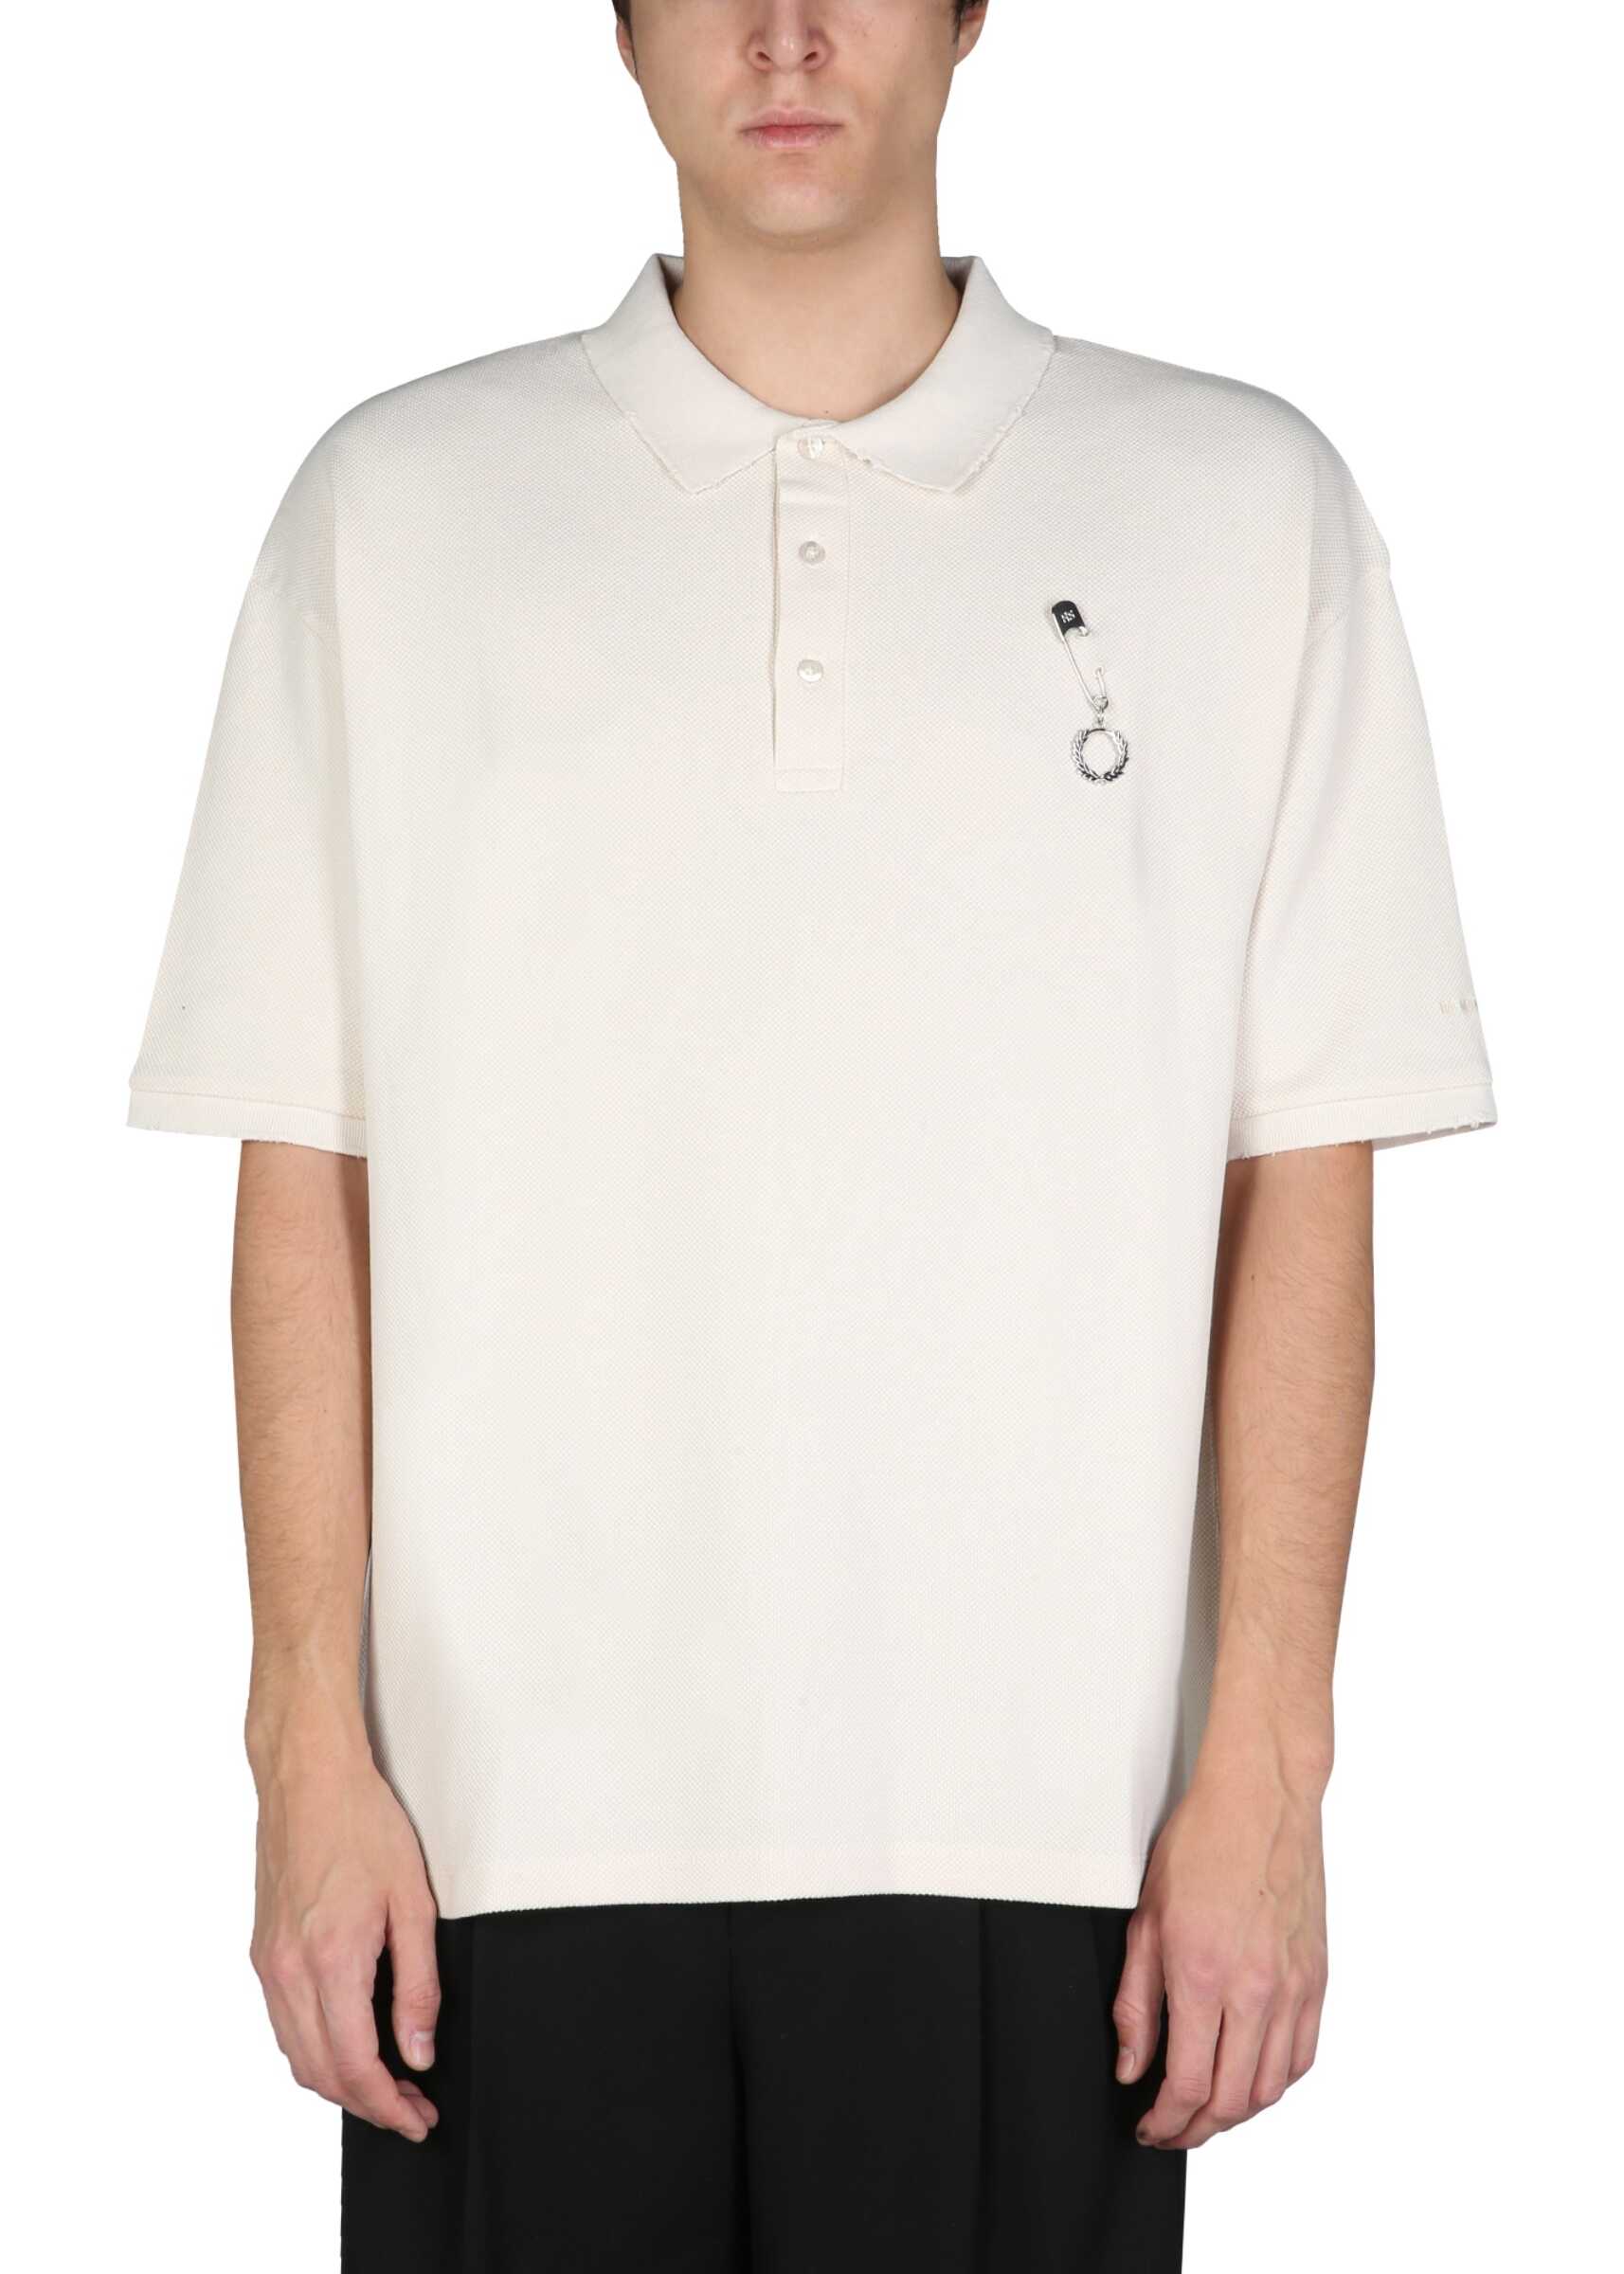 FRED PERRY X RAF SIMONS Distressed Oversized Polo Shirt POWDER